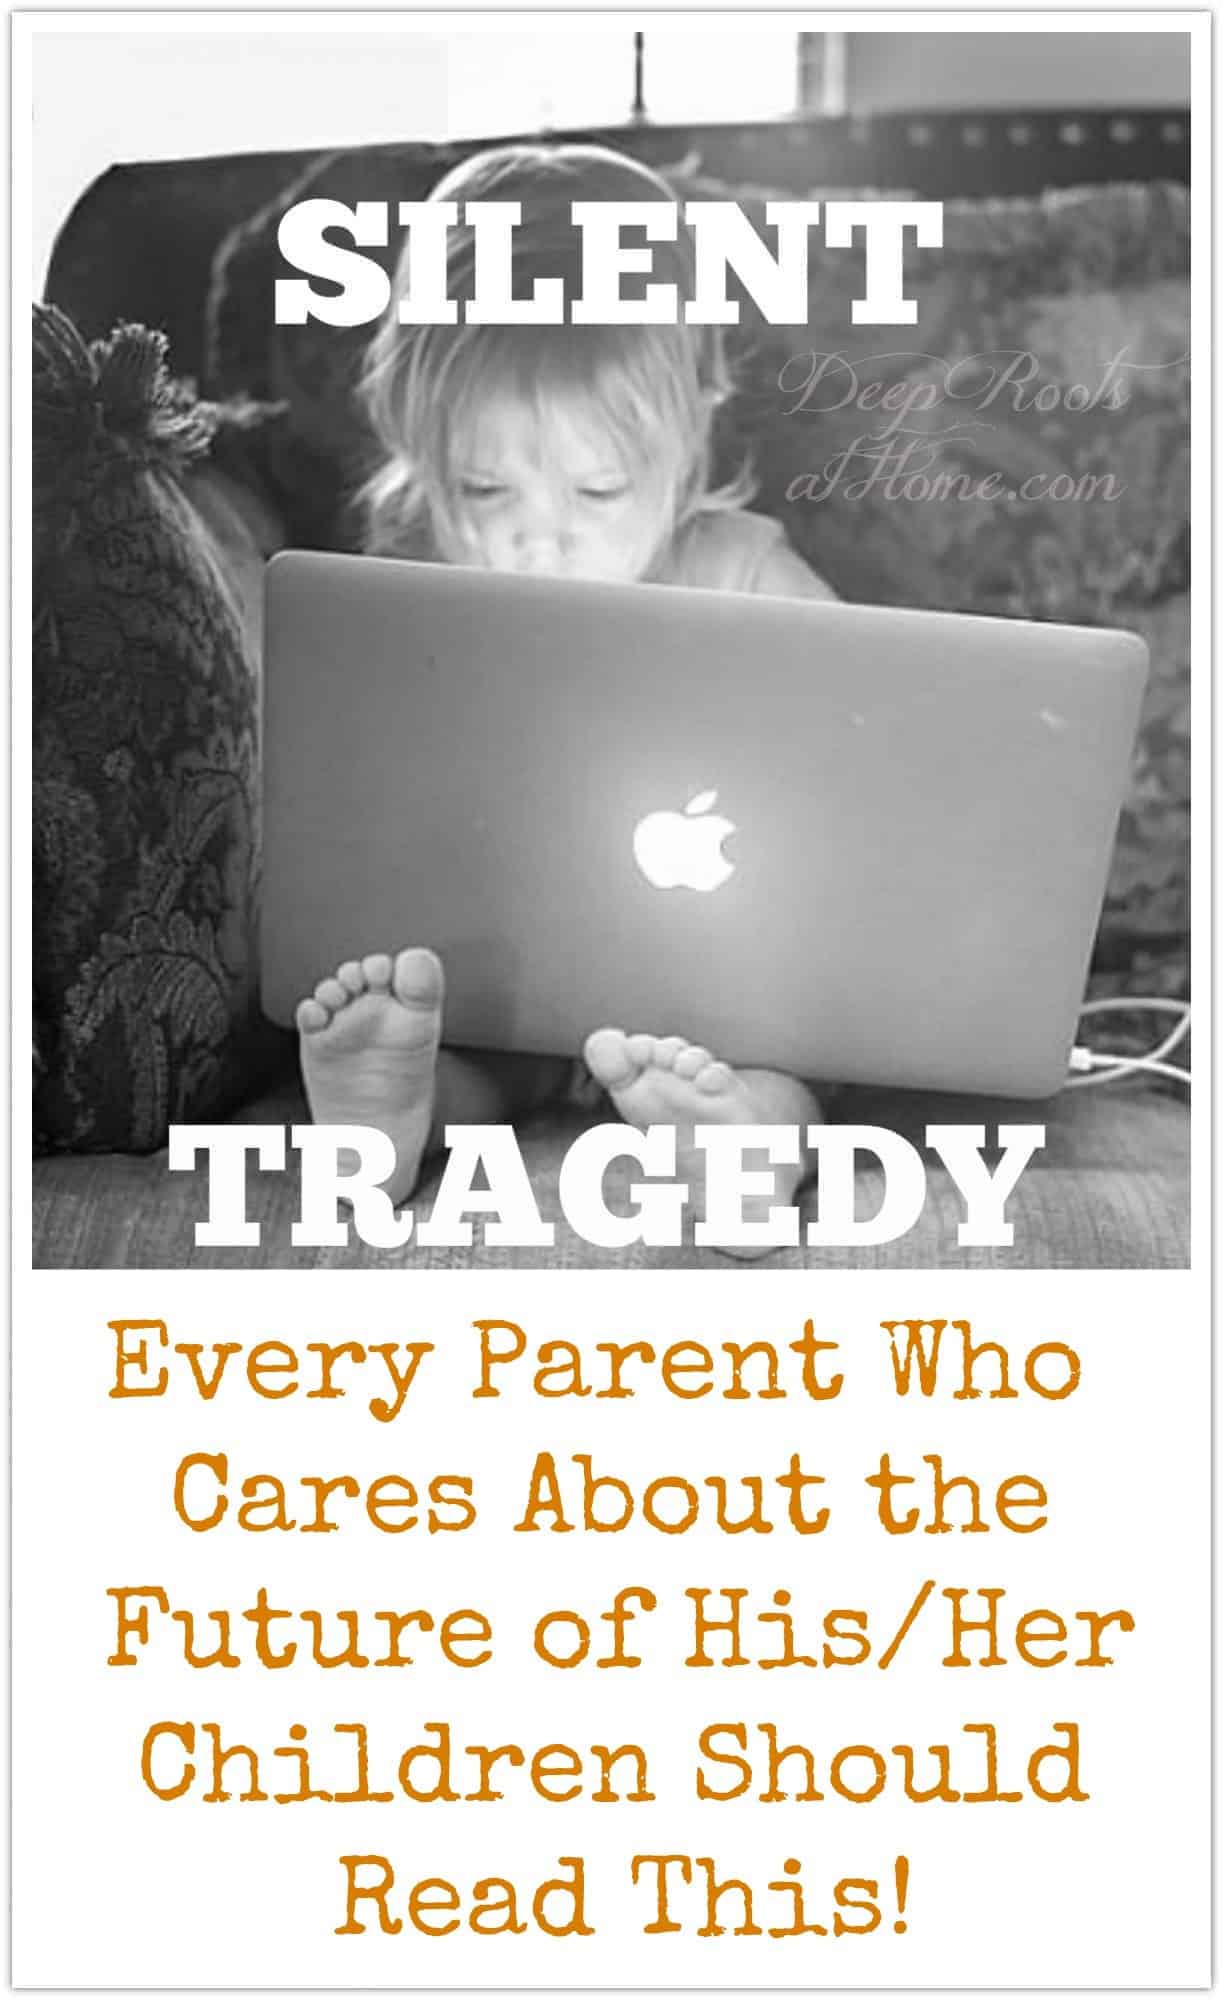 Child Harm, a Silent Tragedy: Every Parent who Cares Should Read This